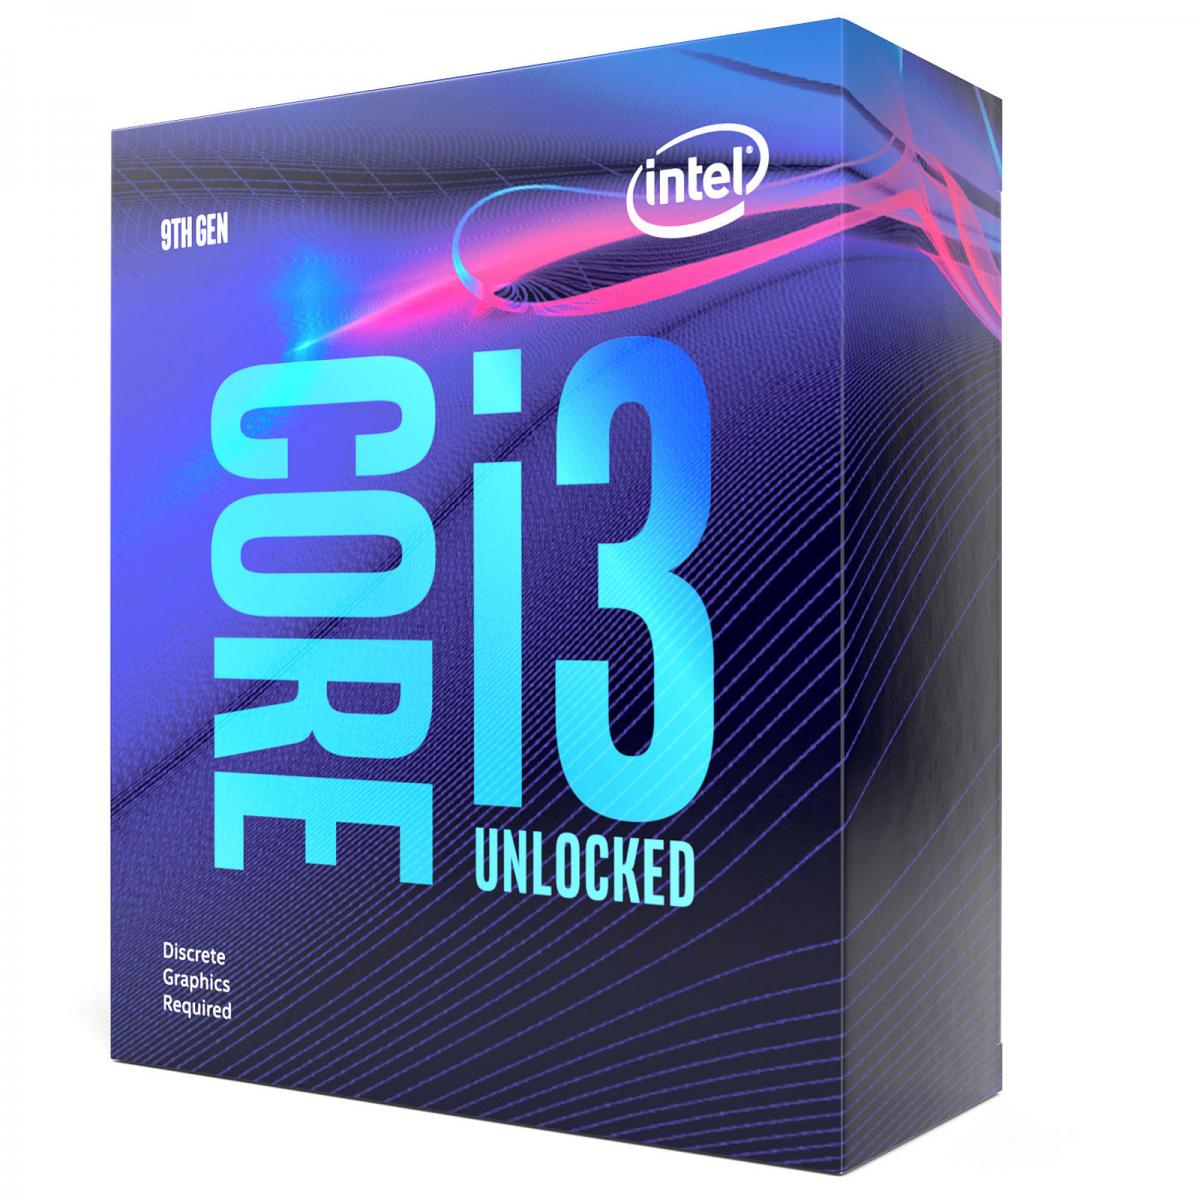 what is intel core i3